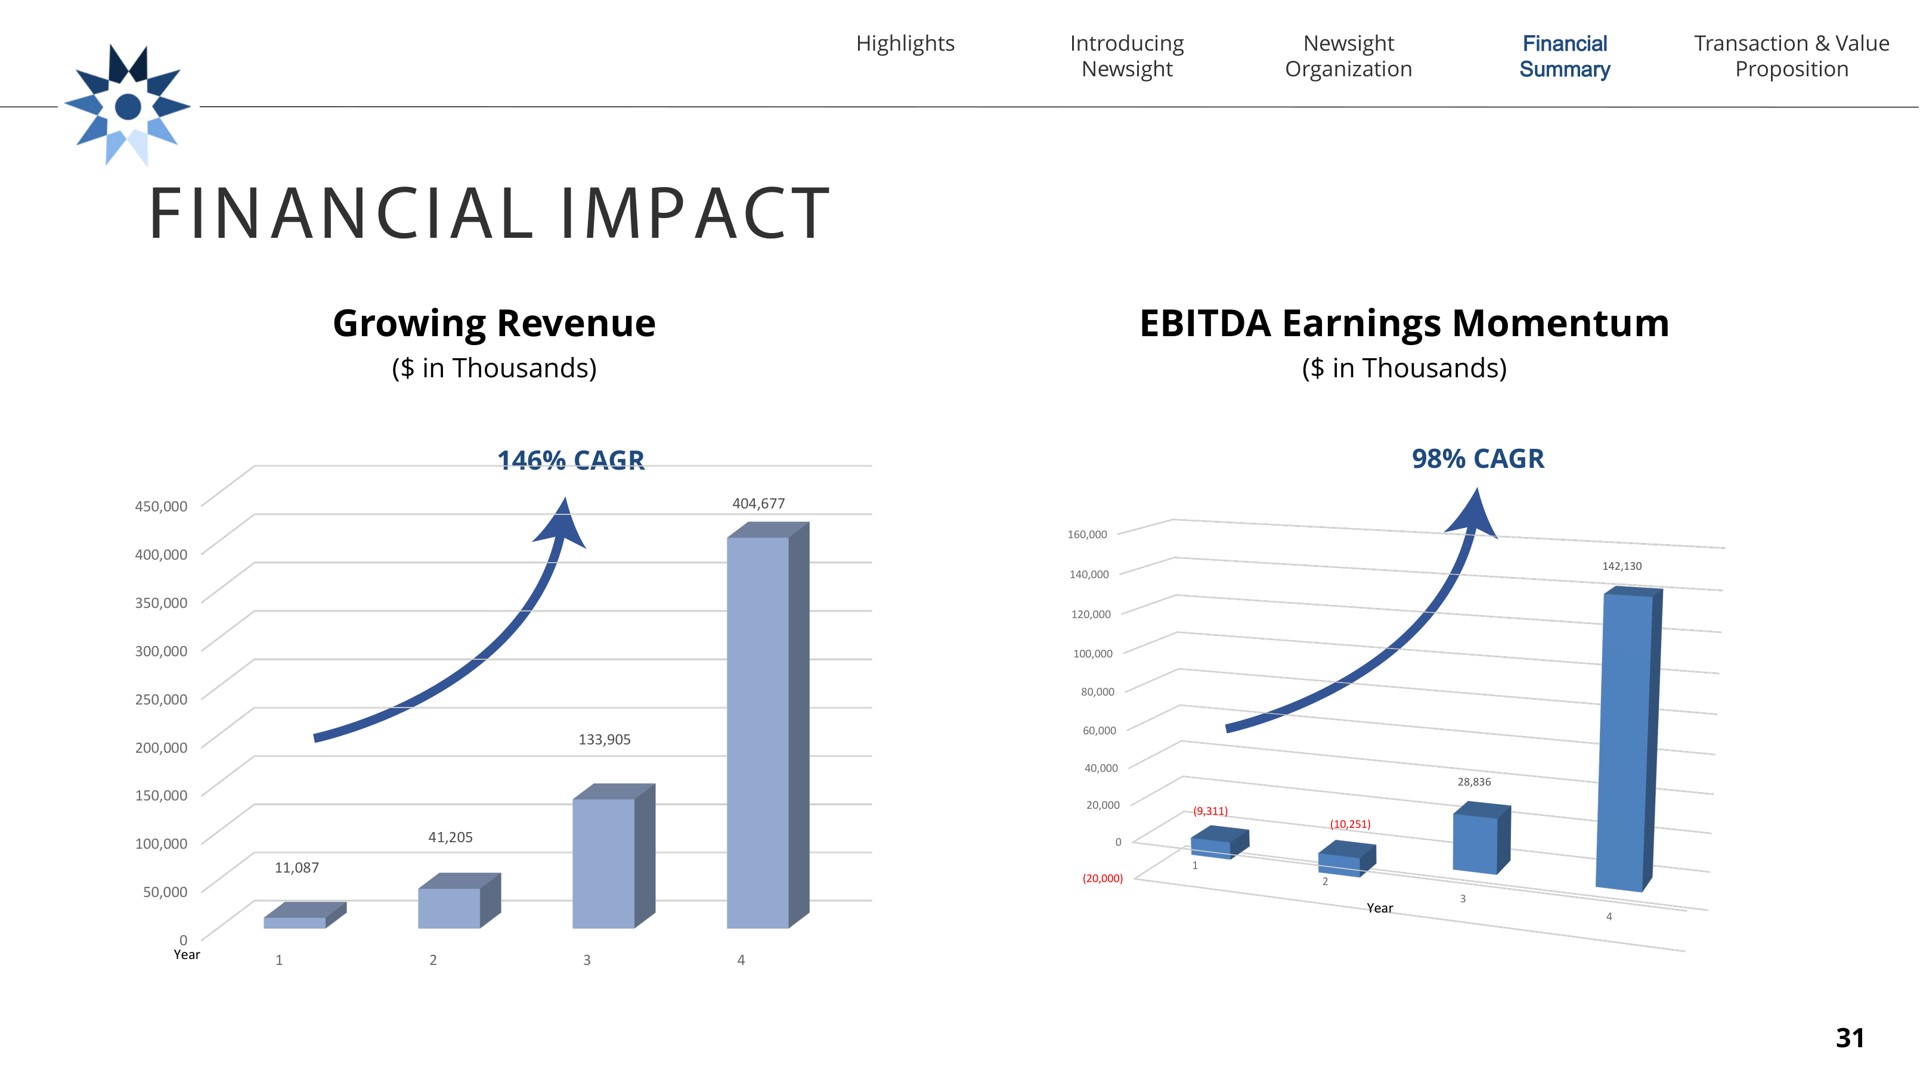 financial impact growing revenue in thousands earnings momentum in thousands | Newsight Imaging